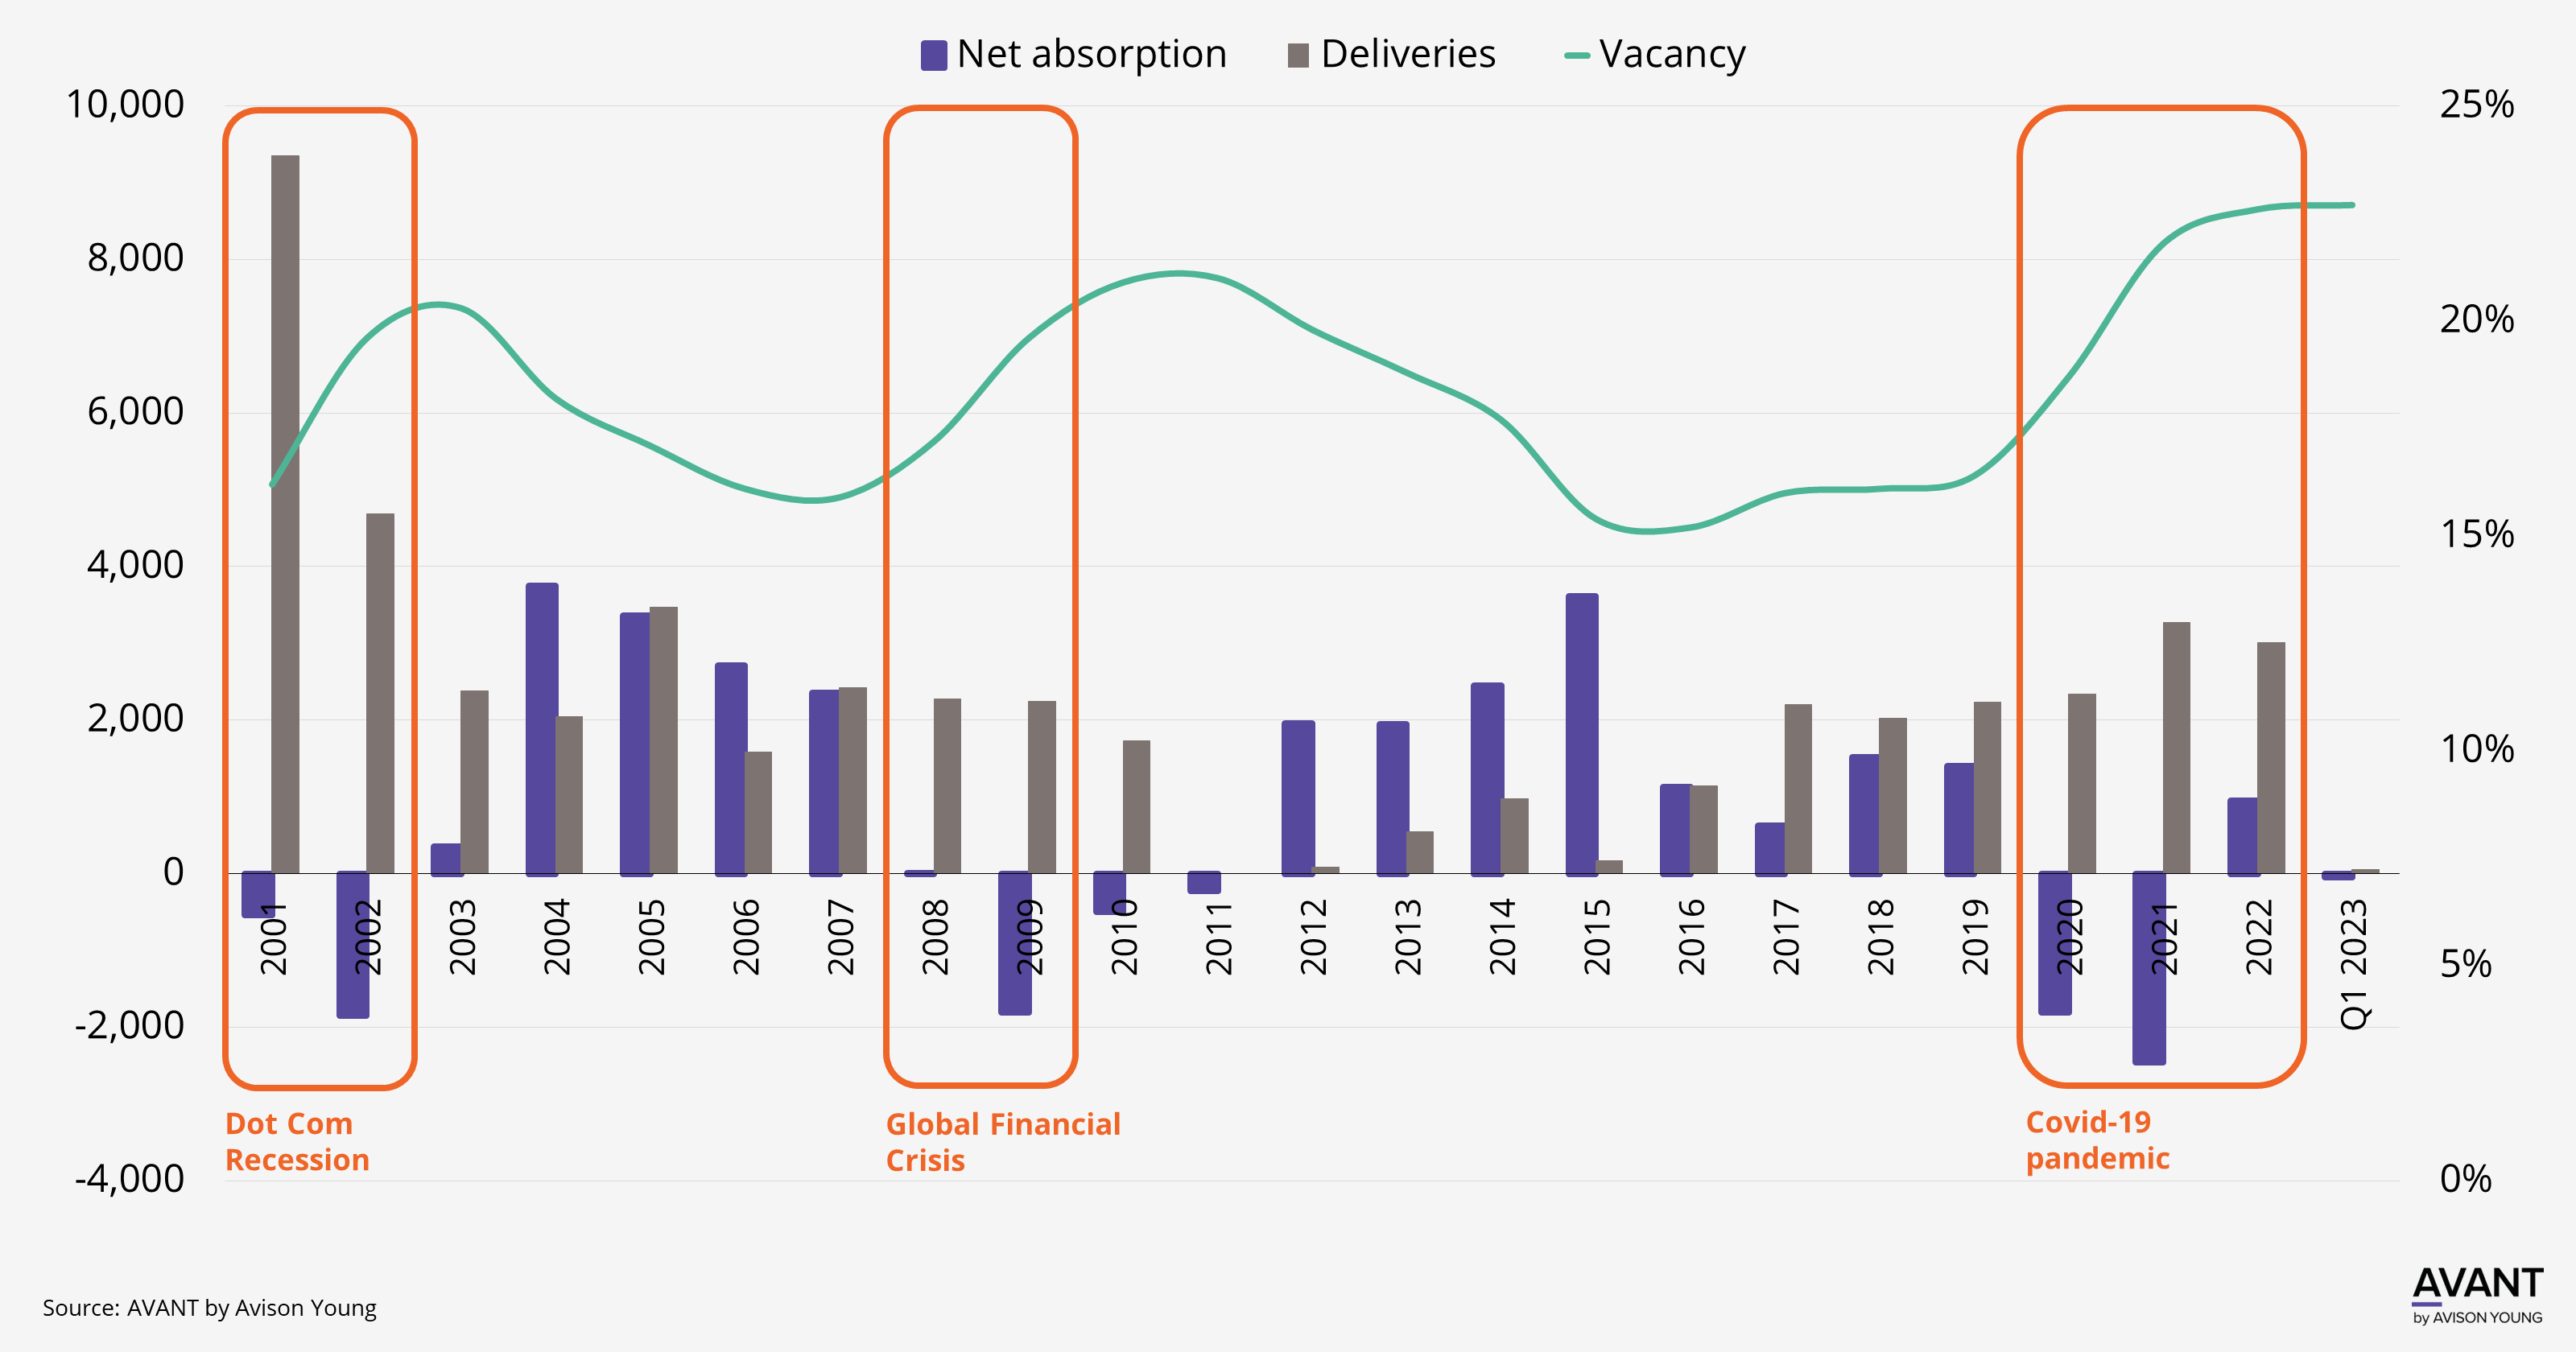 graph of Atlanta's office market's net absorption, deliveries and vacancy during economic downturns like Covid-19, Dot Com Recession and Global Financial Crisis from 2001 to 2023